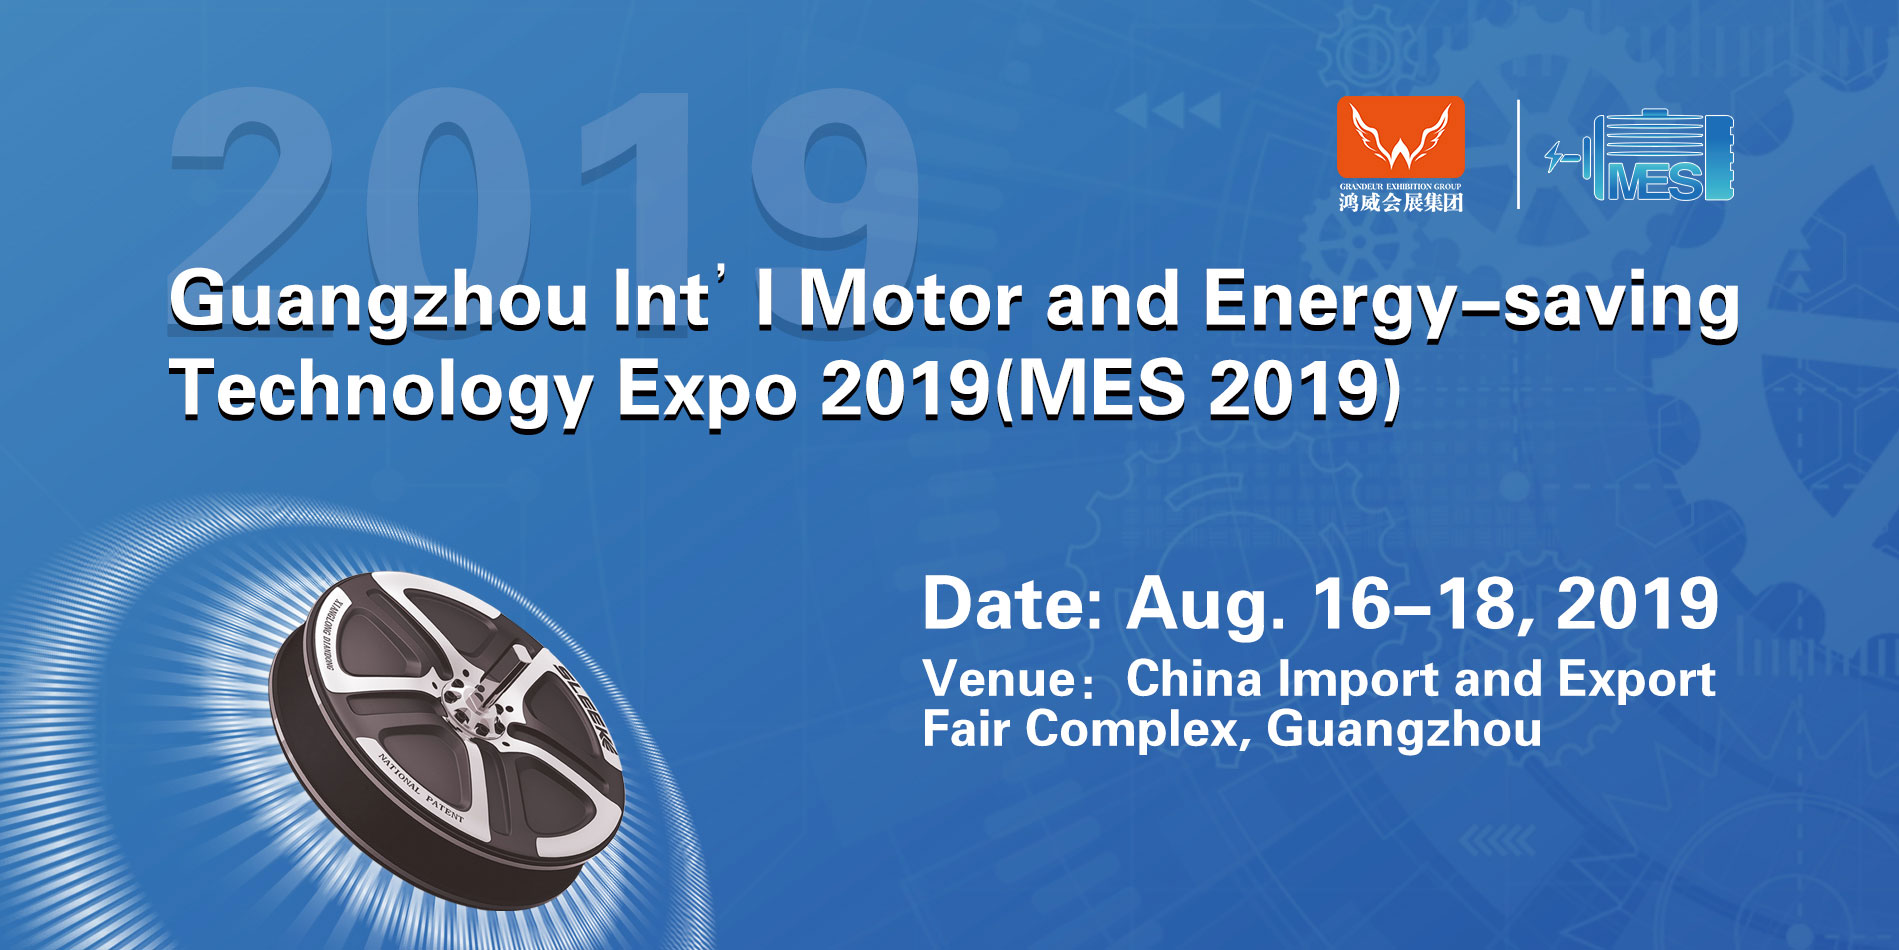 NICHIBO DC MOTOR will participate in the Guangzhou Int'l Motor and Energy-saving Technology Expo (MES 2019)